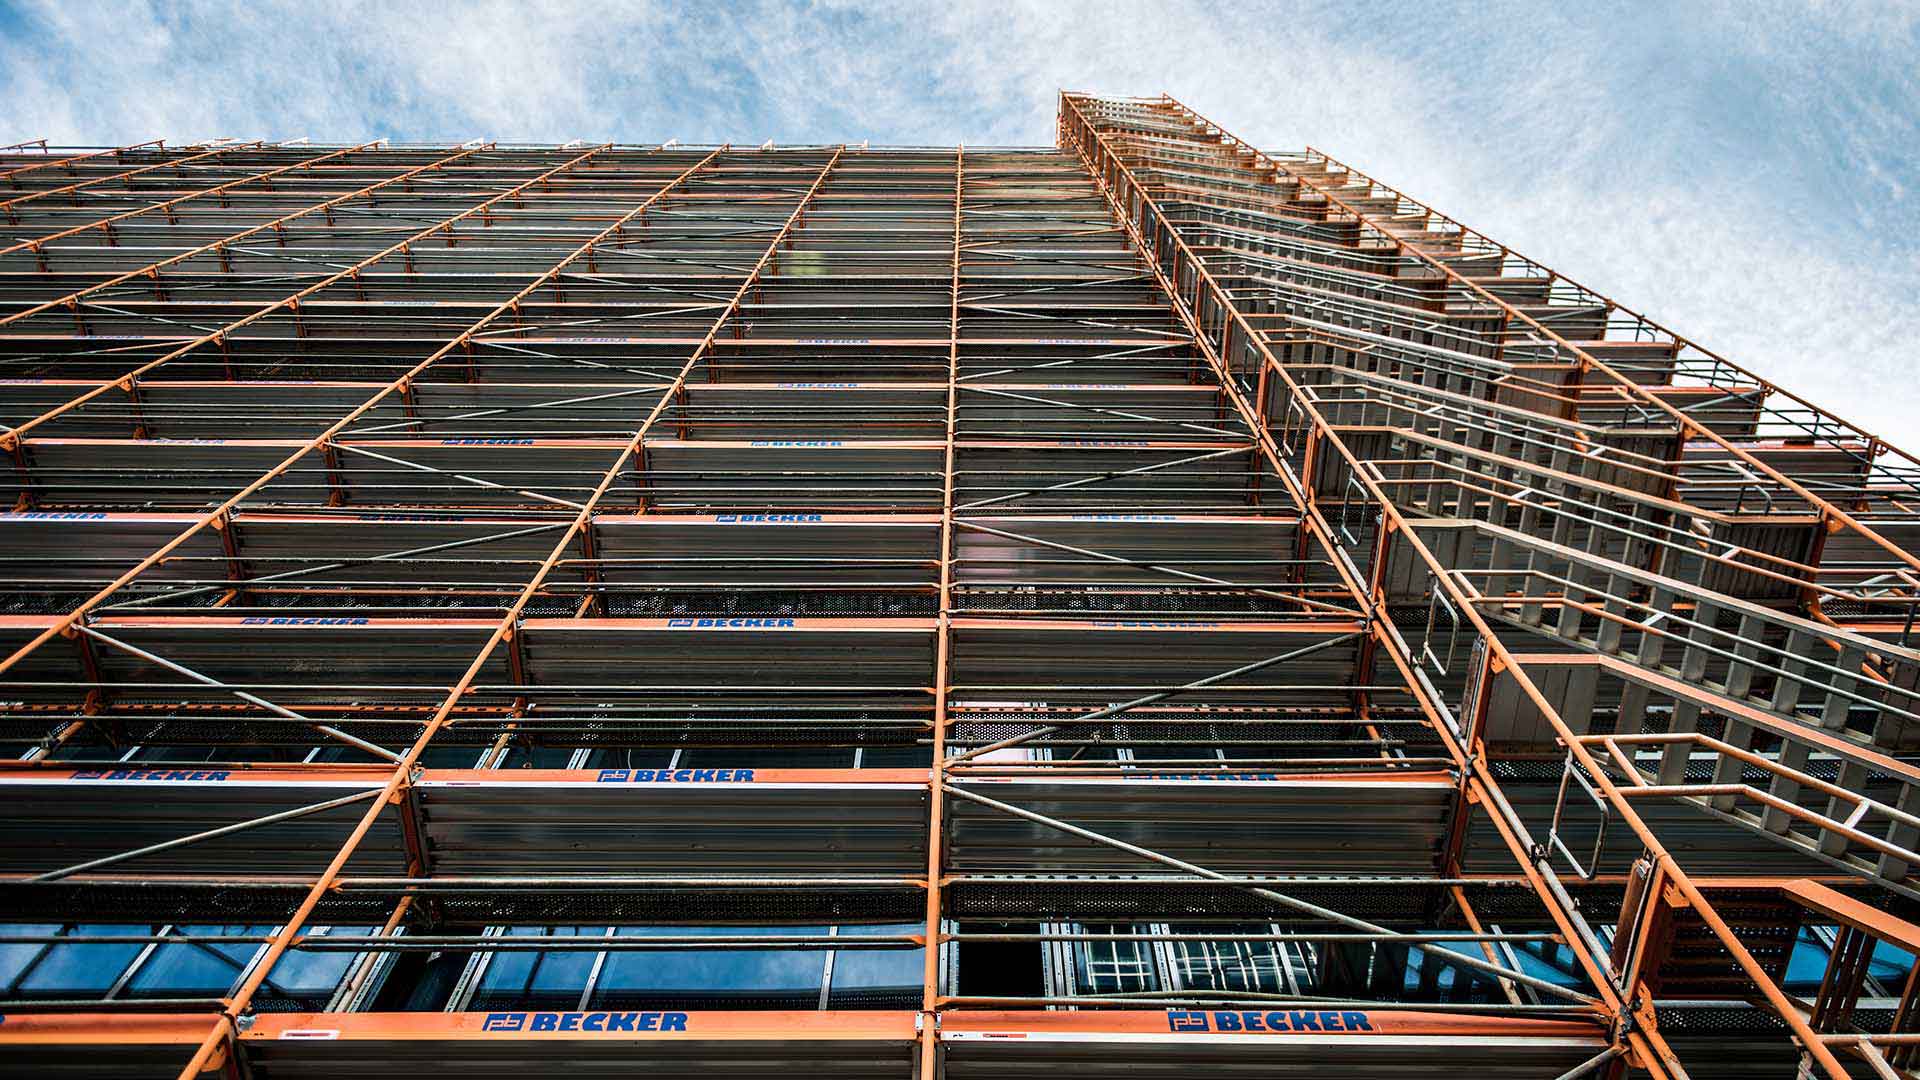 This building construction represents the trend of a \'second skin\' for efficiency retrofits